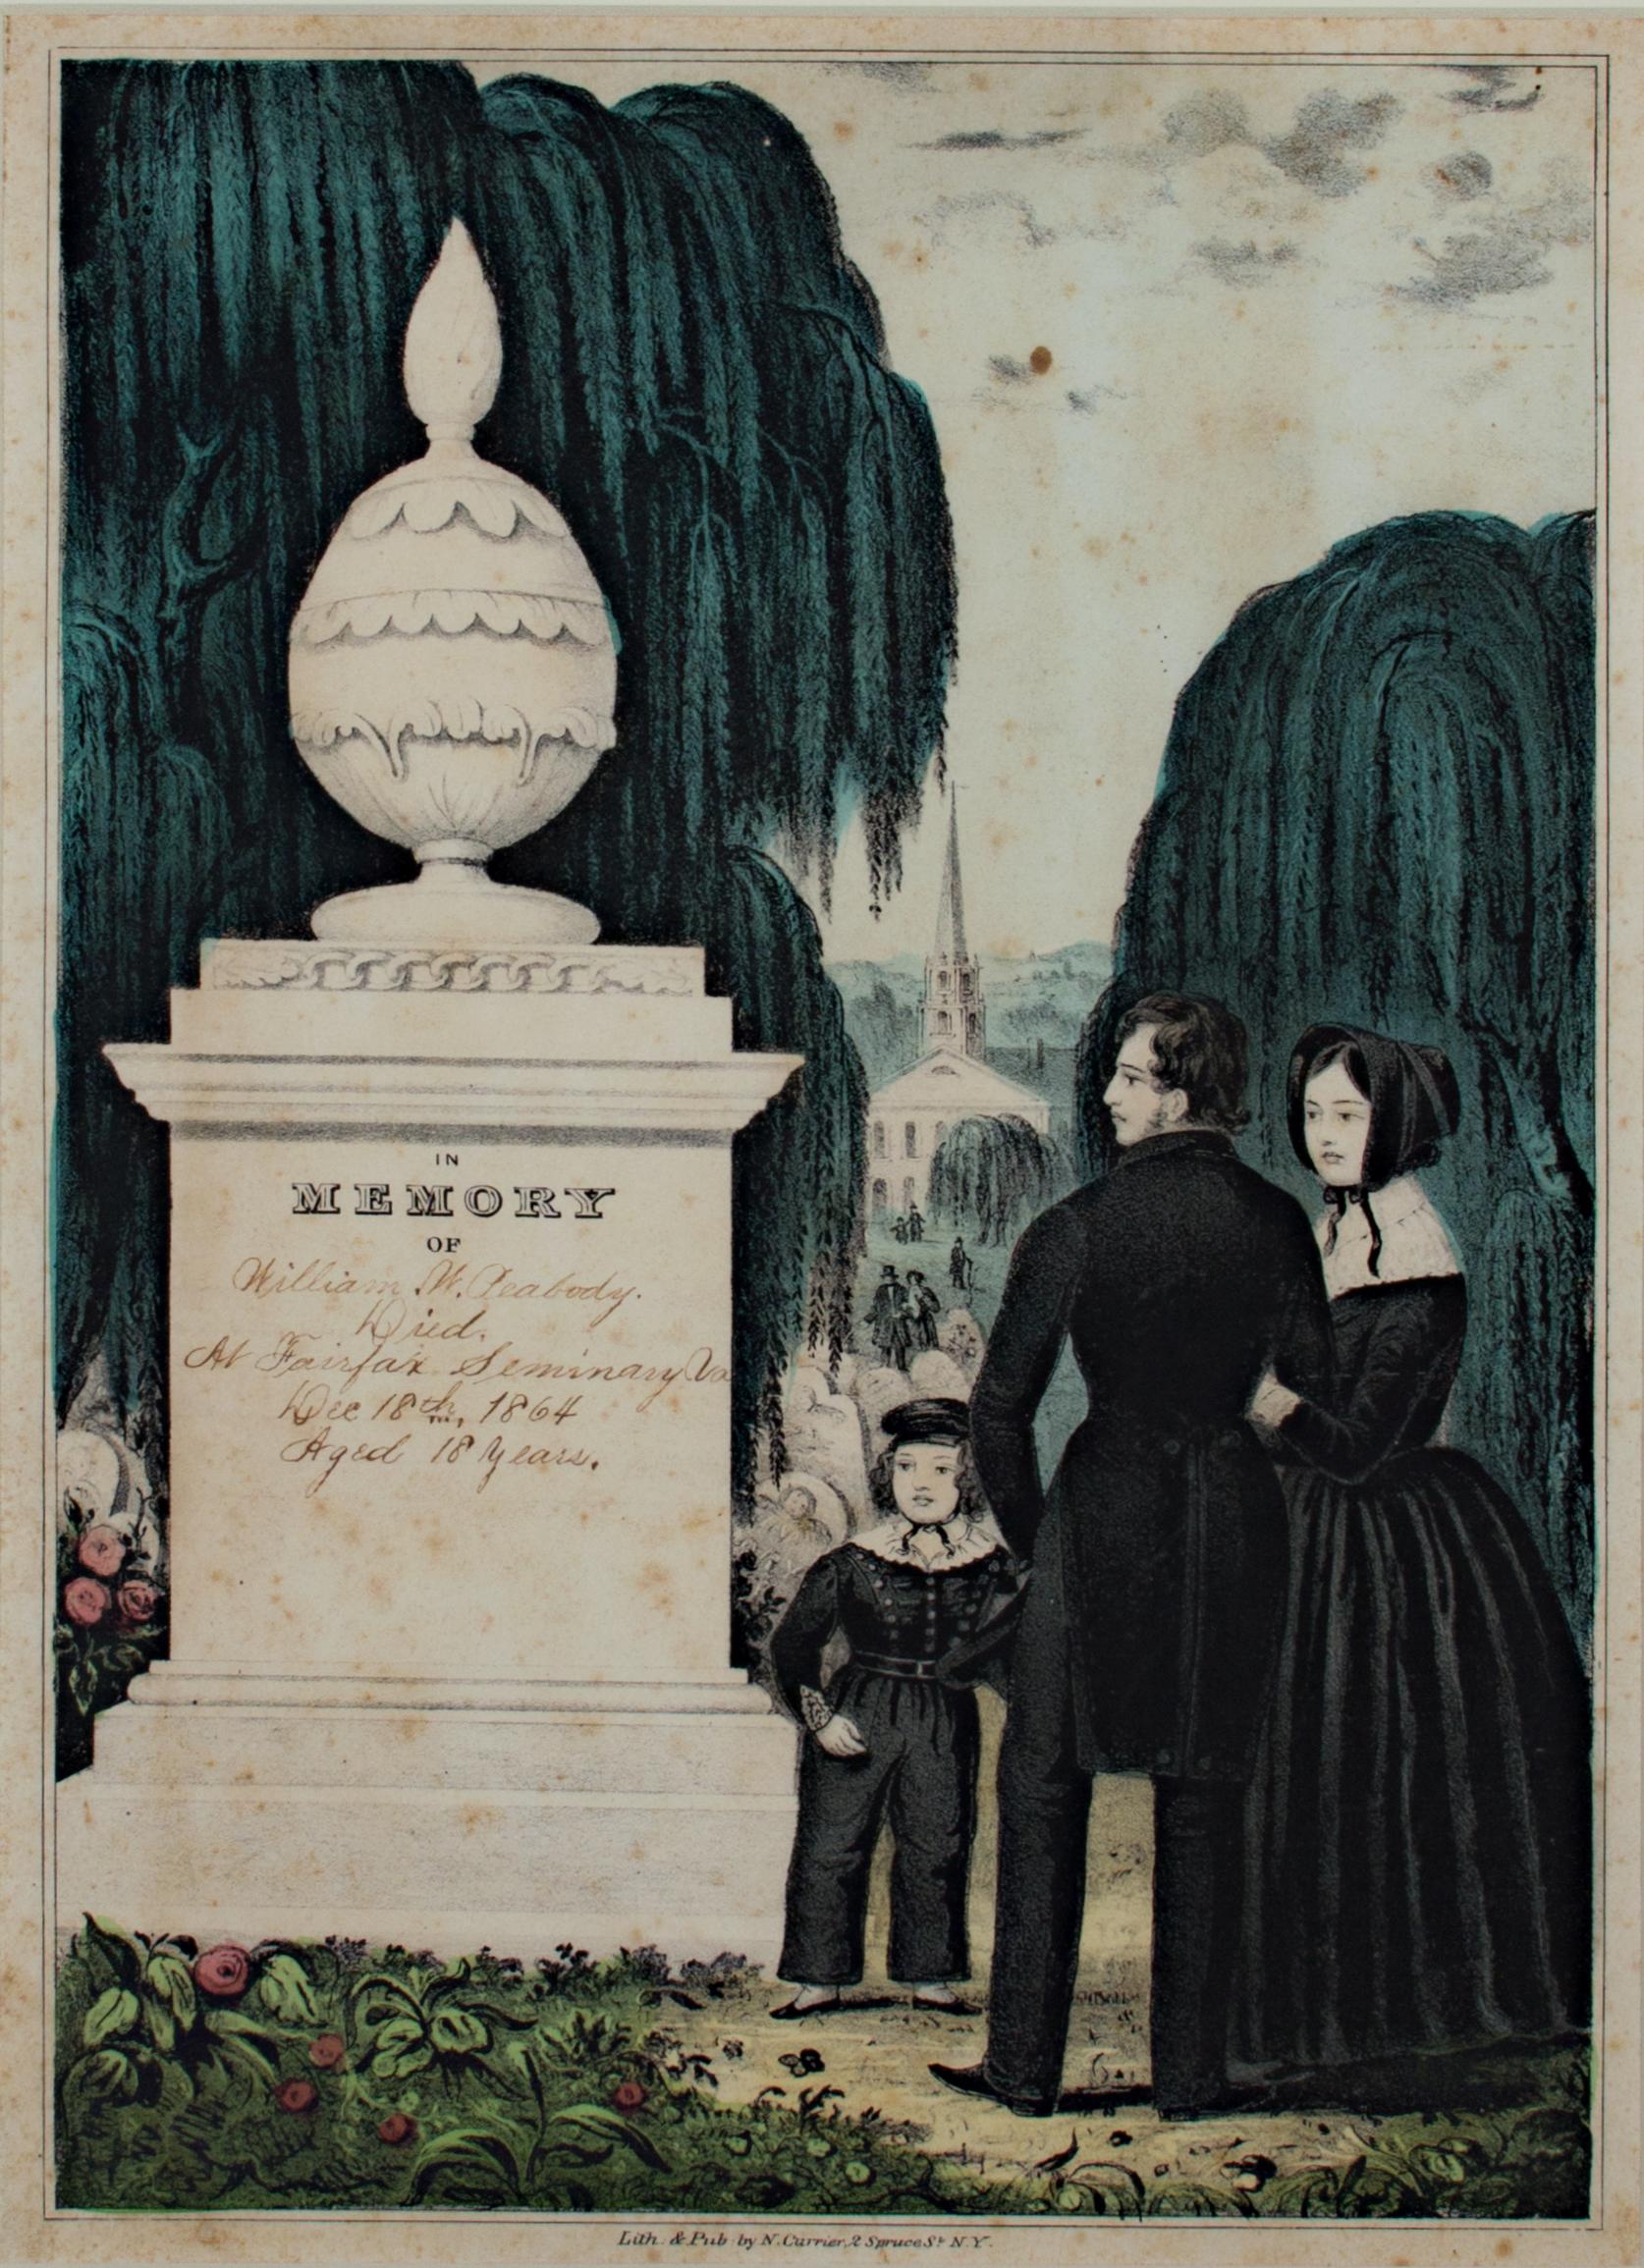 Nathaniel Currier Figurative Print - 'In Memory of William W. Peabody' original hand-colored lithograph by N. Currier